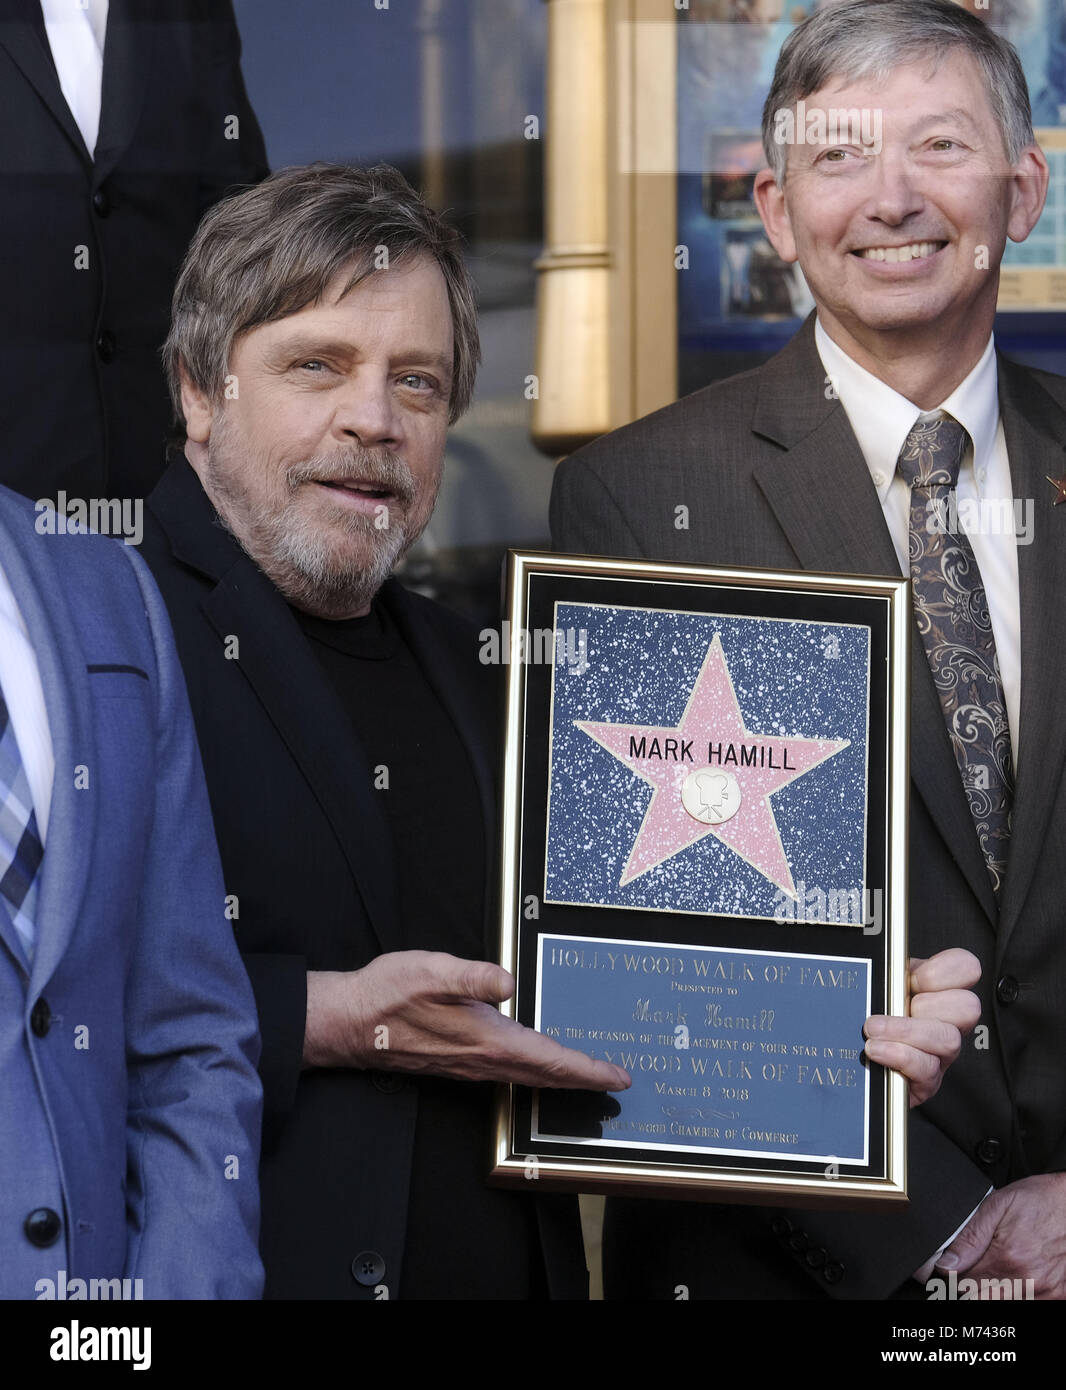 Los Angeles, California, USA. 8th Mar, 2018. Actor Mark Hamill, attends his Hollywood Walk of Fame Star ceremony where he was the recipient of the 2,630th star on the Hollywood Walk of Fame in the category of Motion Pictures on March 8, 2018 in Los Angeles. Credit: Ringo Chiu/ZUMA Wire/Alamy Live News Stock Photo